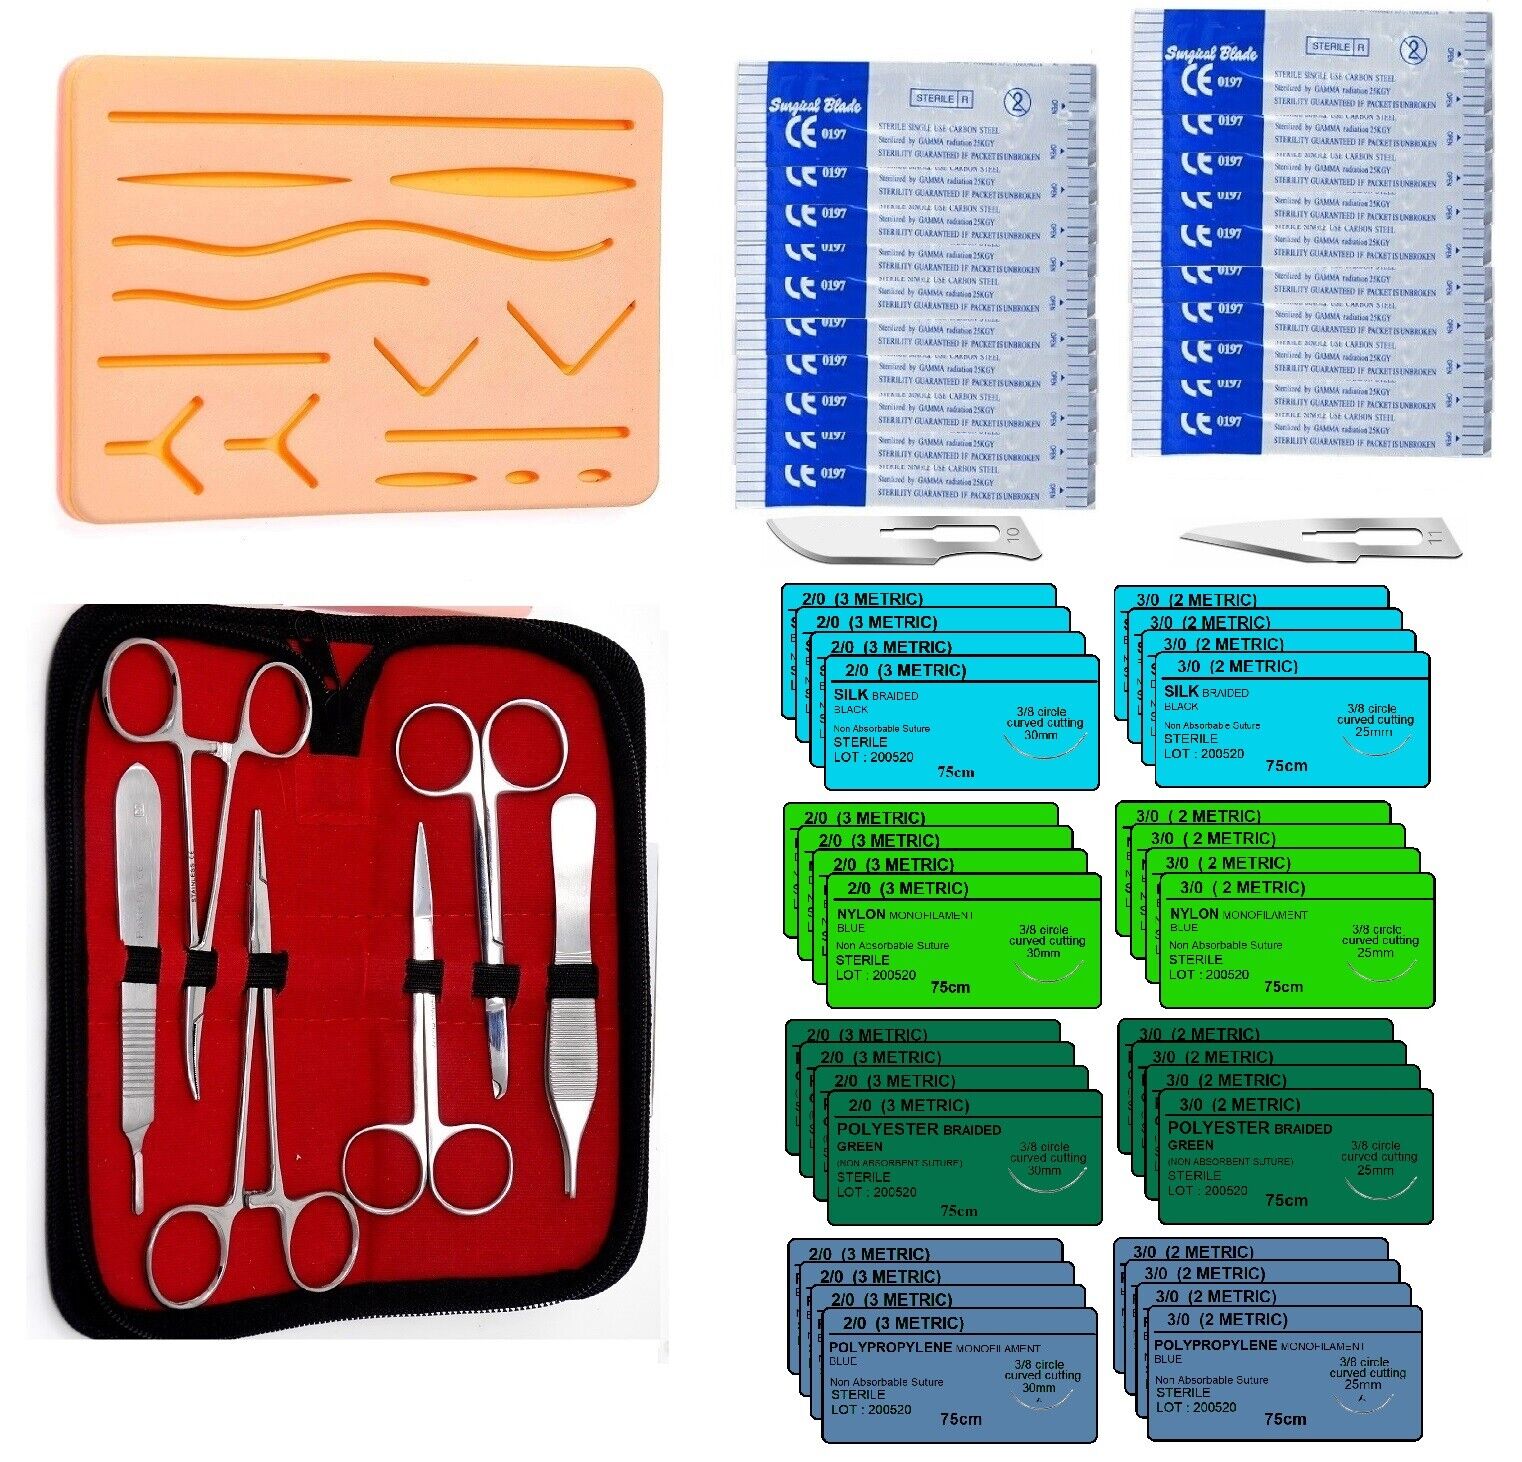 59 Piece Practice Suture Kit for Medical and Veterinary Student Training A2Z SCILAB Does Not Apply